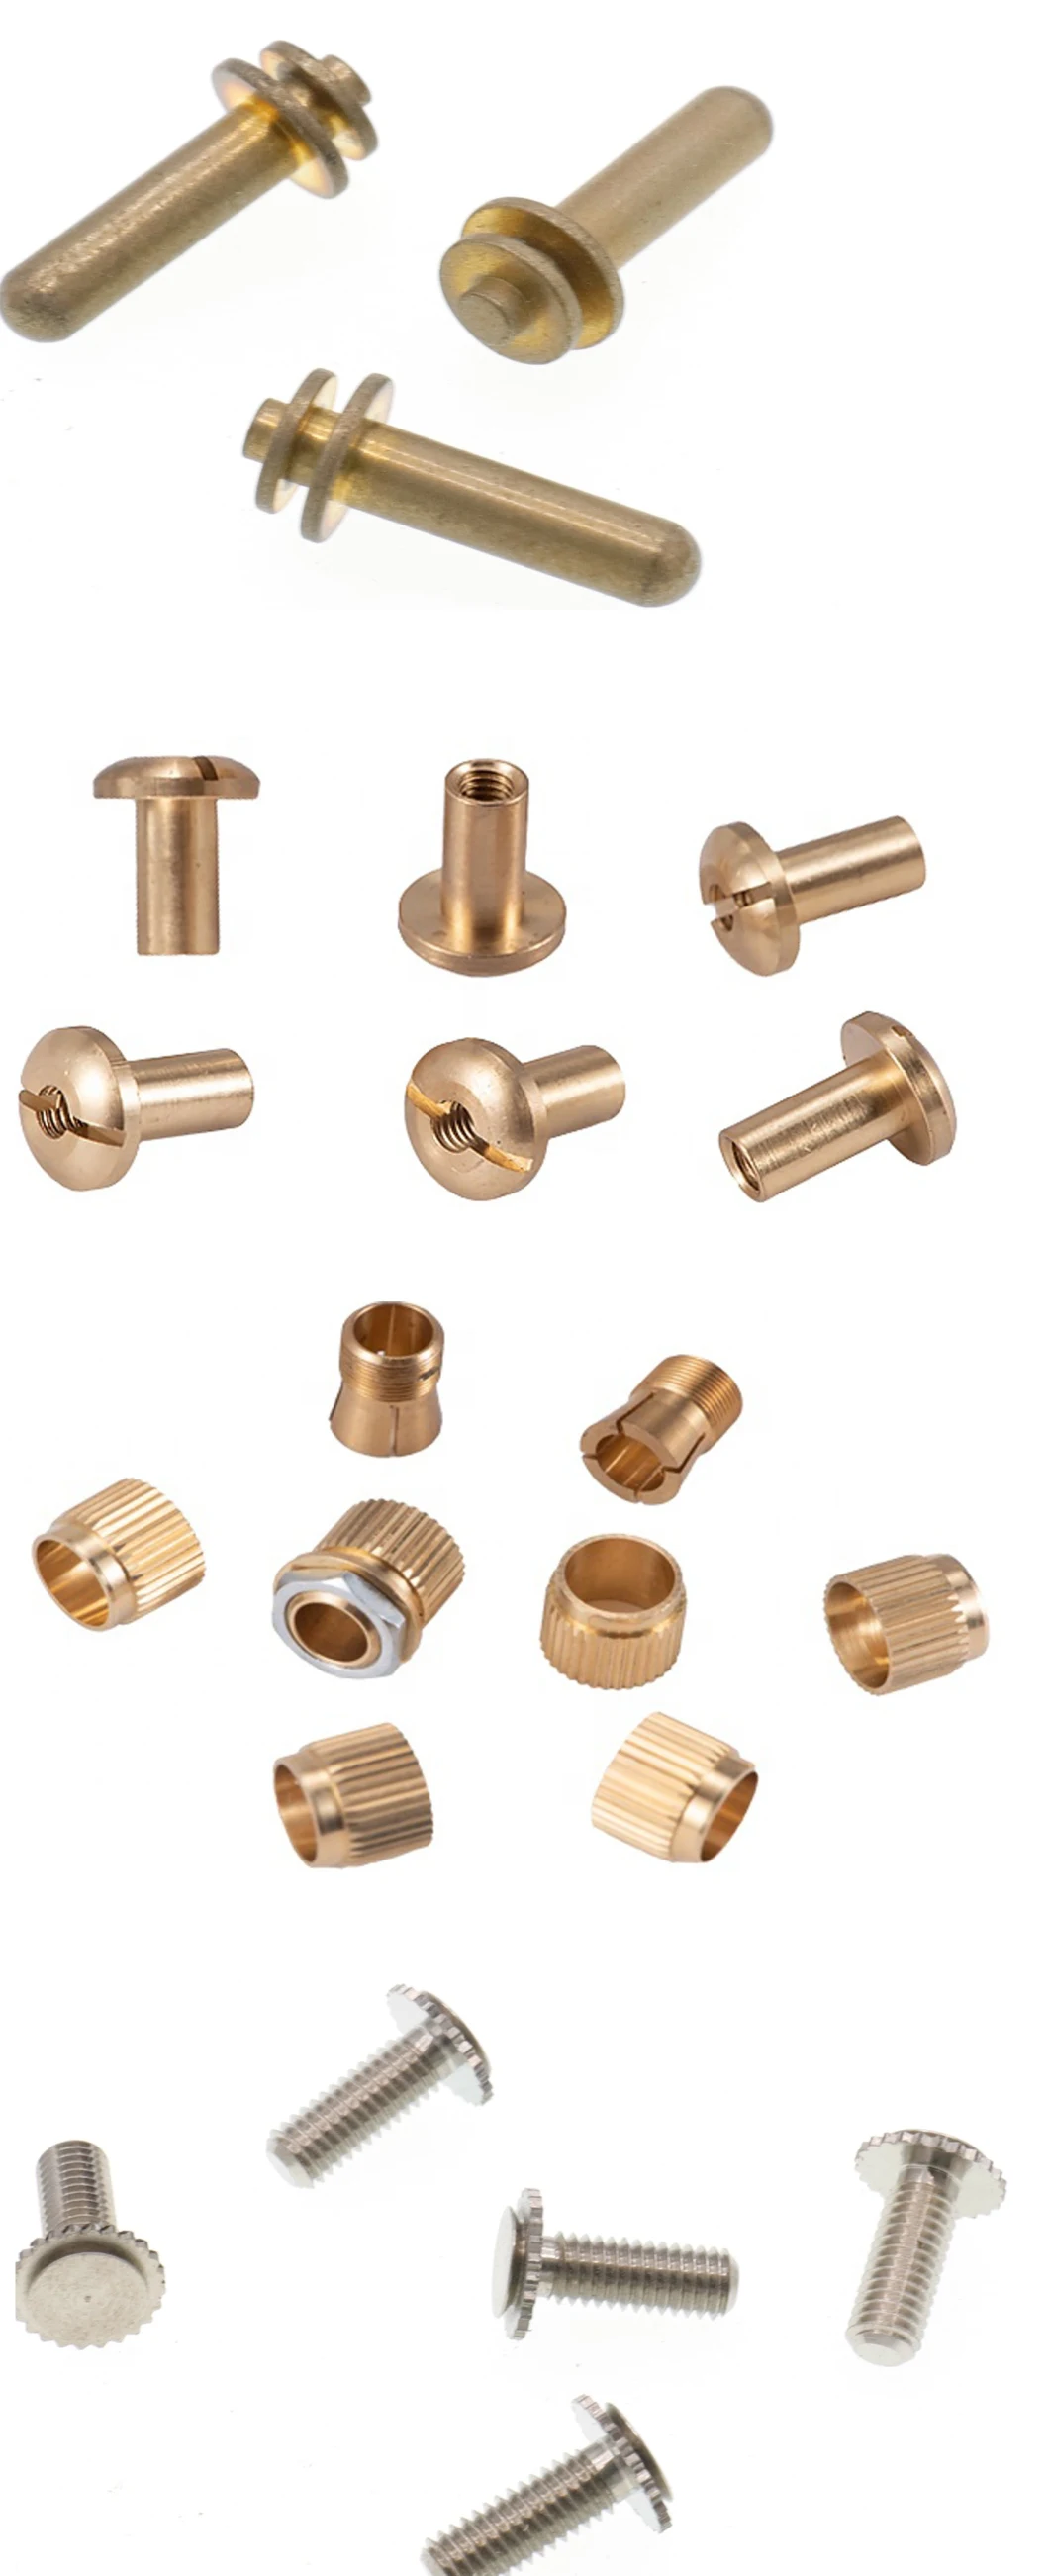 China Manufacturer Produce OEM Copper Parts for Nut Round Head